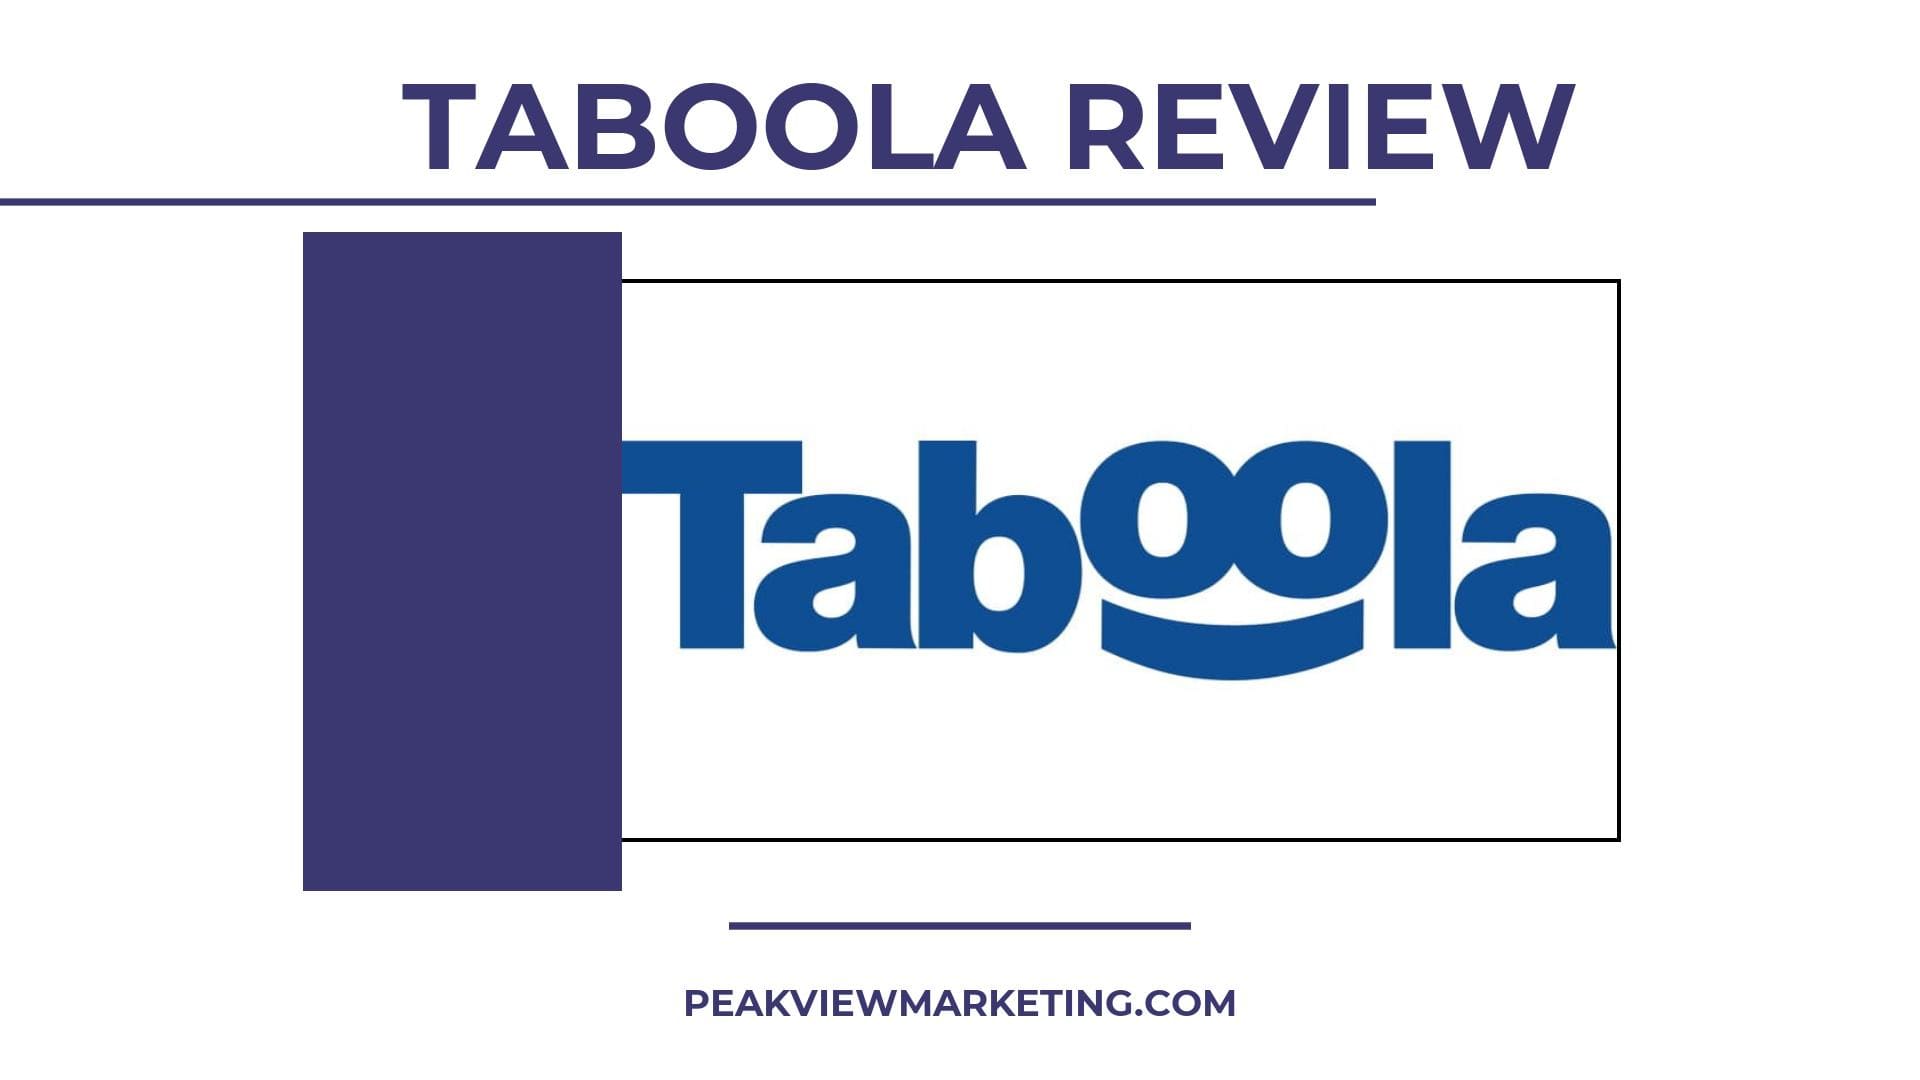 Taboola Review Image